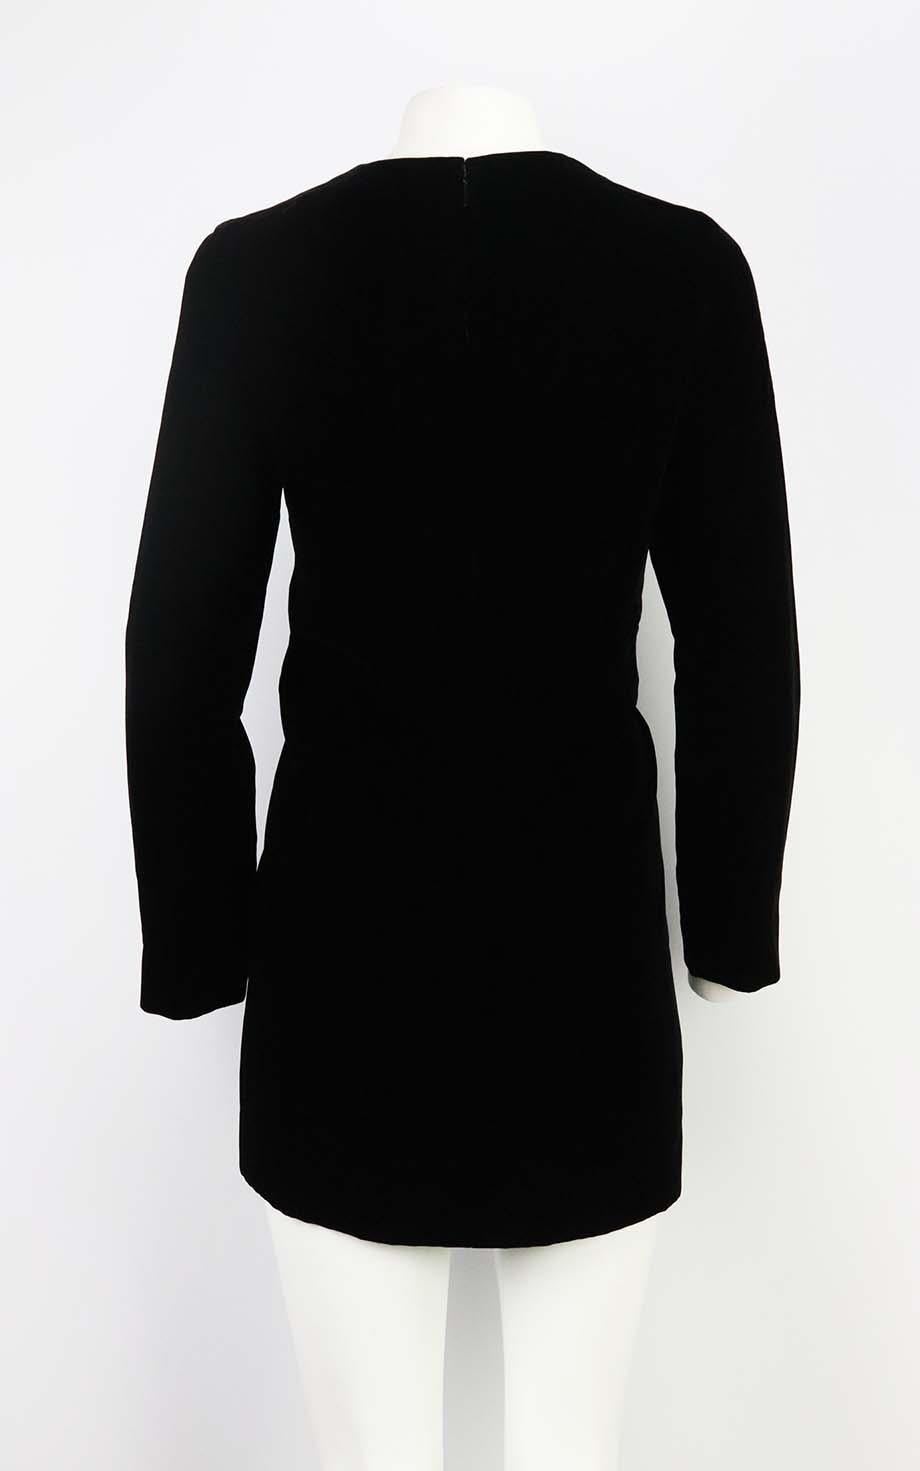 This mini dress by Saint Laurent has an alluring notched neckline and puffed sleeves that add definition to the slim silhouette. Black velvet. Zip fastening at back. 85% Viscose, 15% cupro; lining: 100% silk. Size: FR 42 (UK 14, US 10, IT 46). Bust